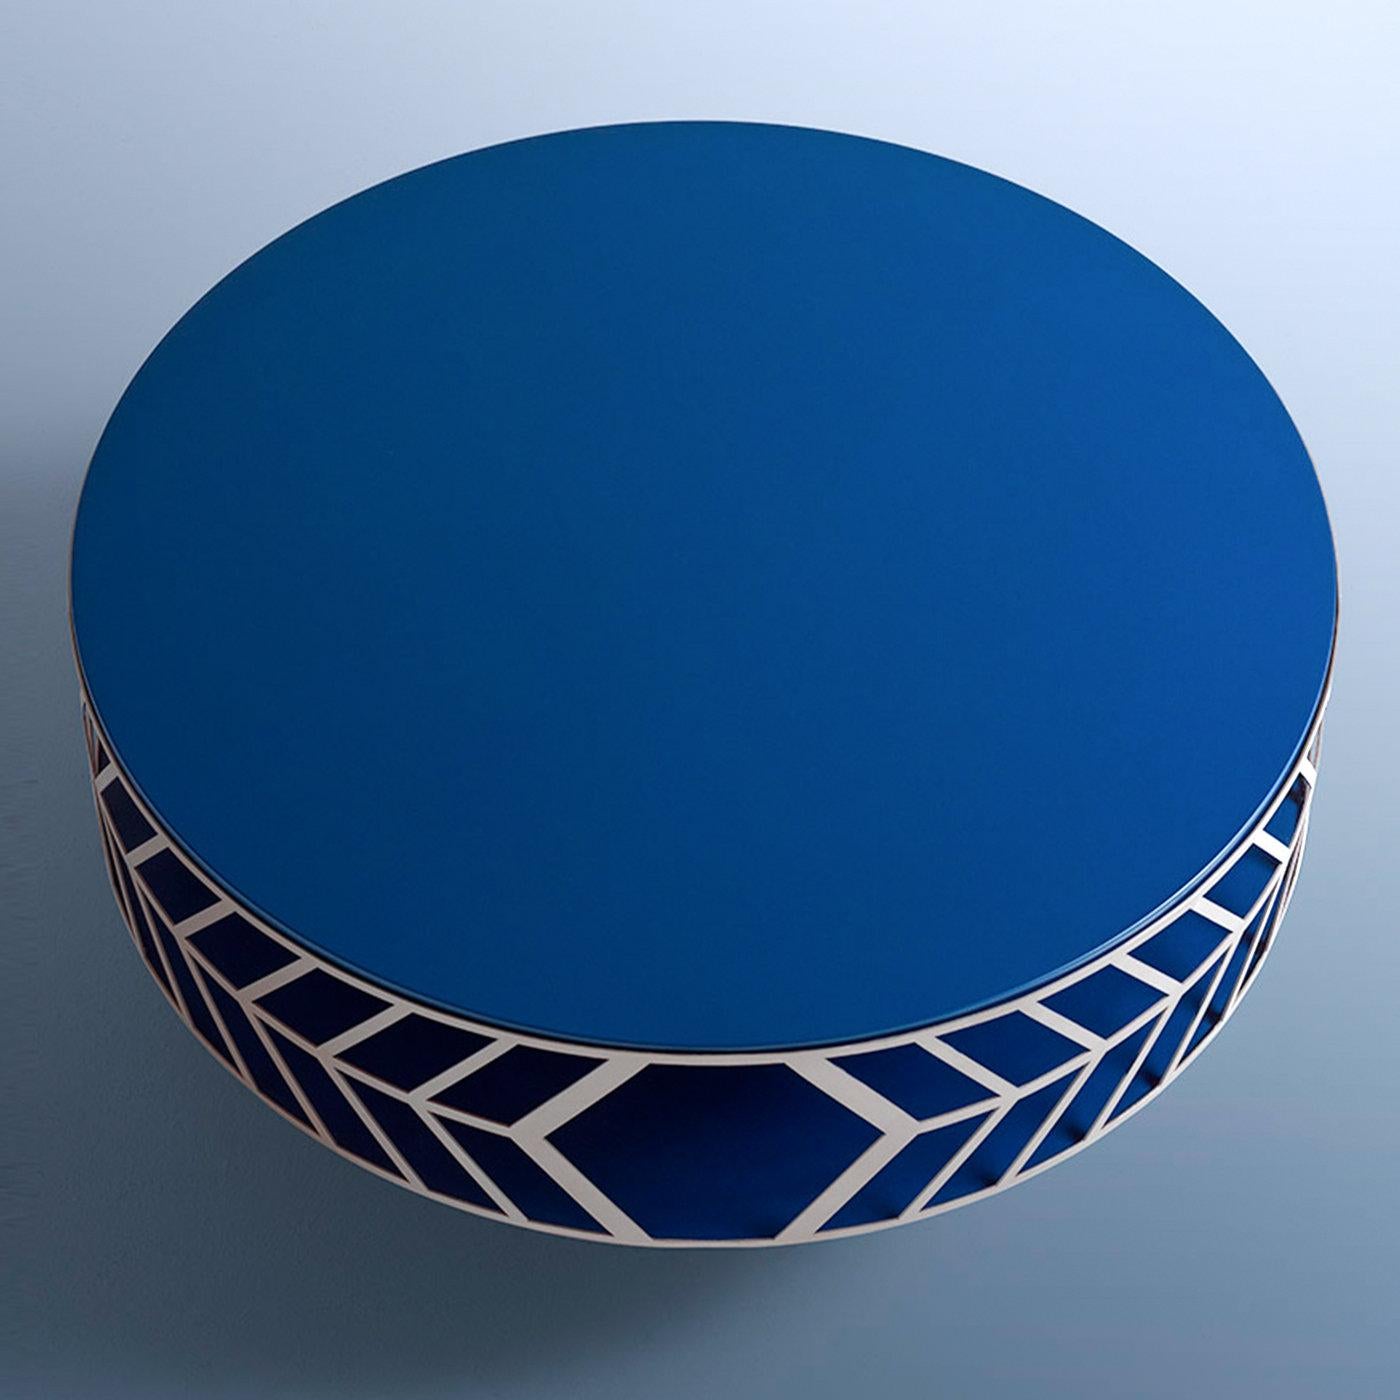 This sculptural coffee table was designed to be the focal point in a dull modern living room. Its MDF frame, lacquered in an intense shade of matte blue, is comprised of a structural column and two disks sealing the wide storage compartment that is